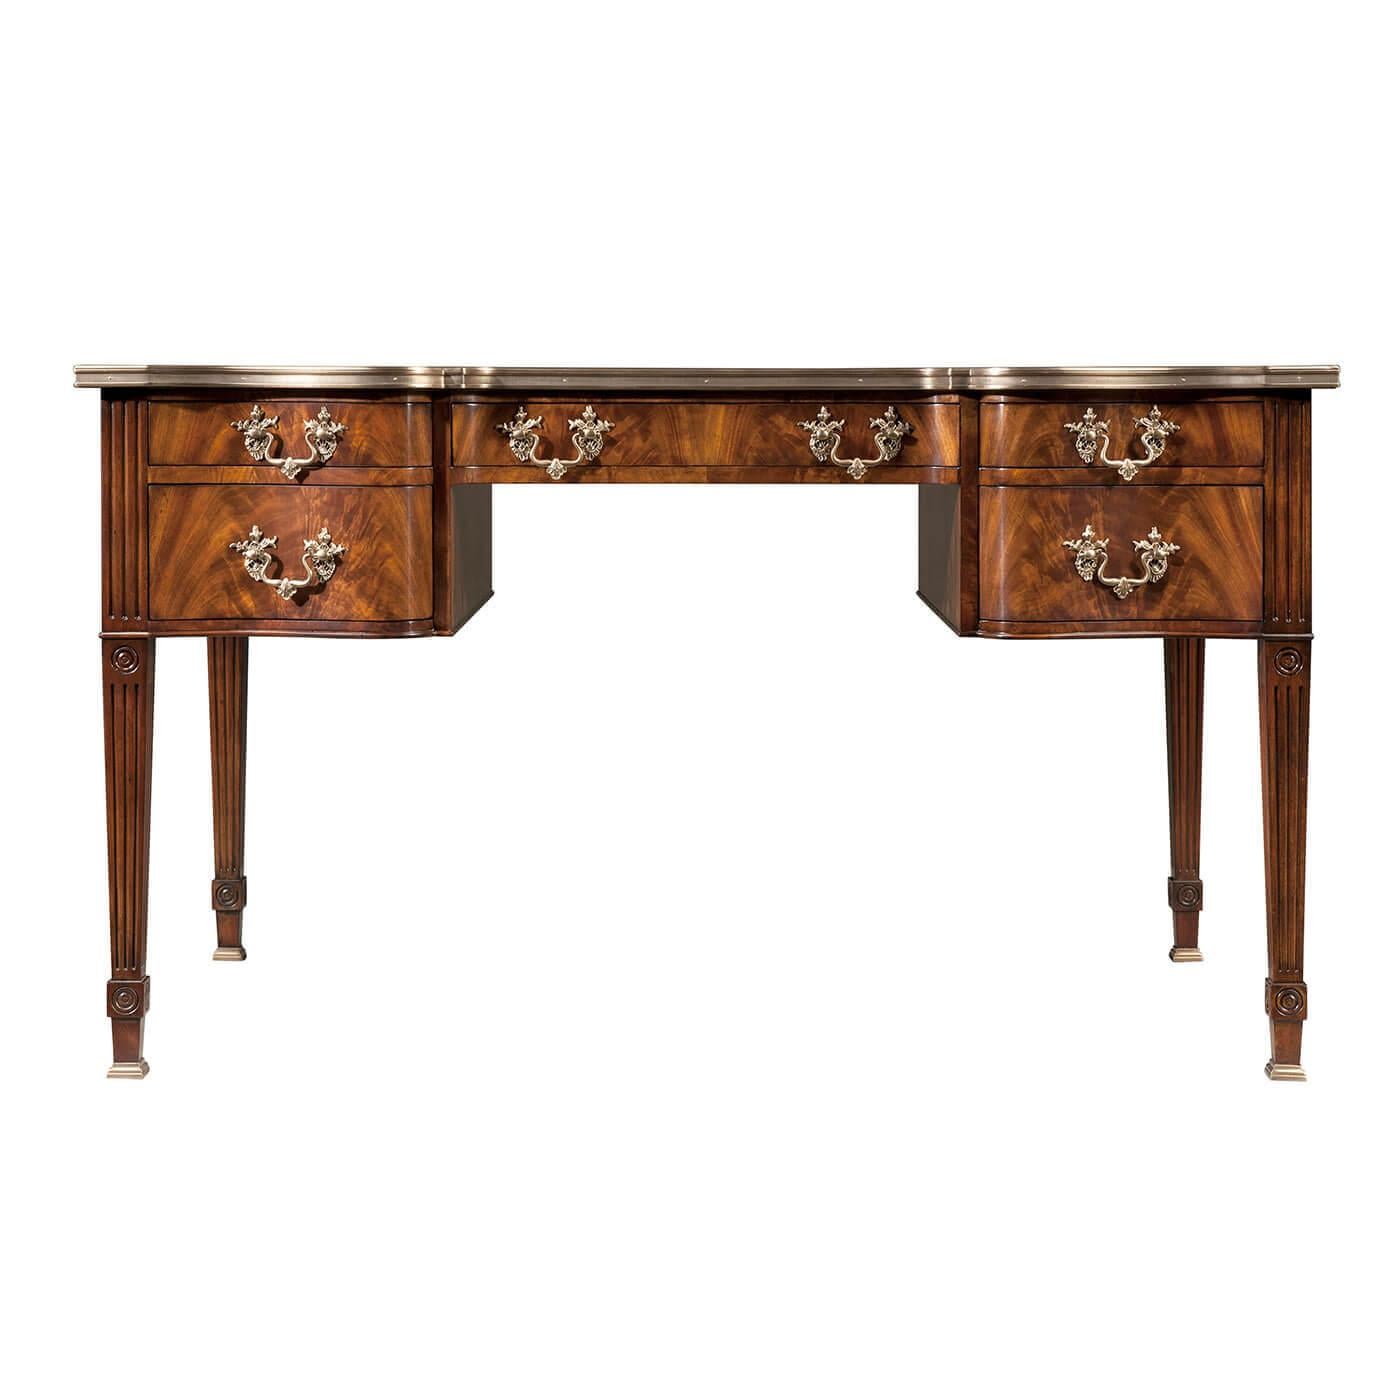 A Chippendale style mahogany and flame veneered bureau plat desk, the serpentine brass bound top above five drawers creating a kneehole, on square fluted legs.
Dimensions: 55